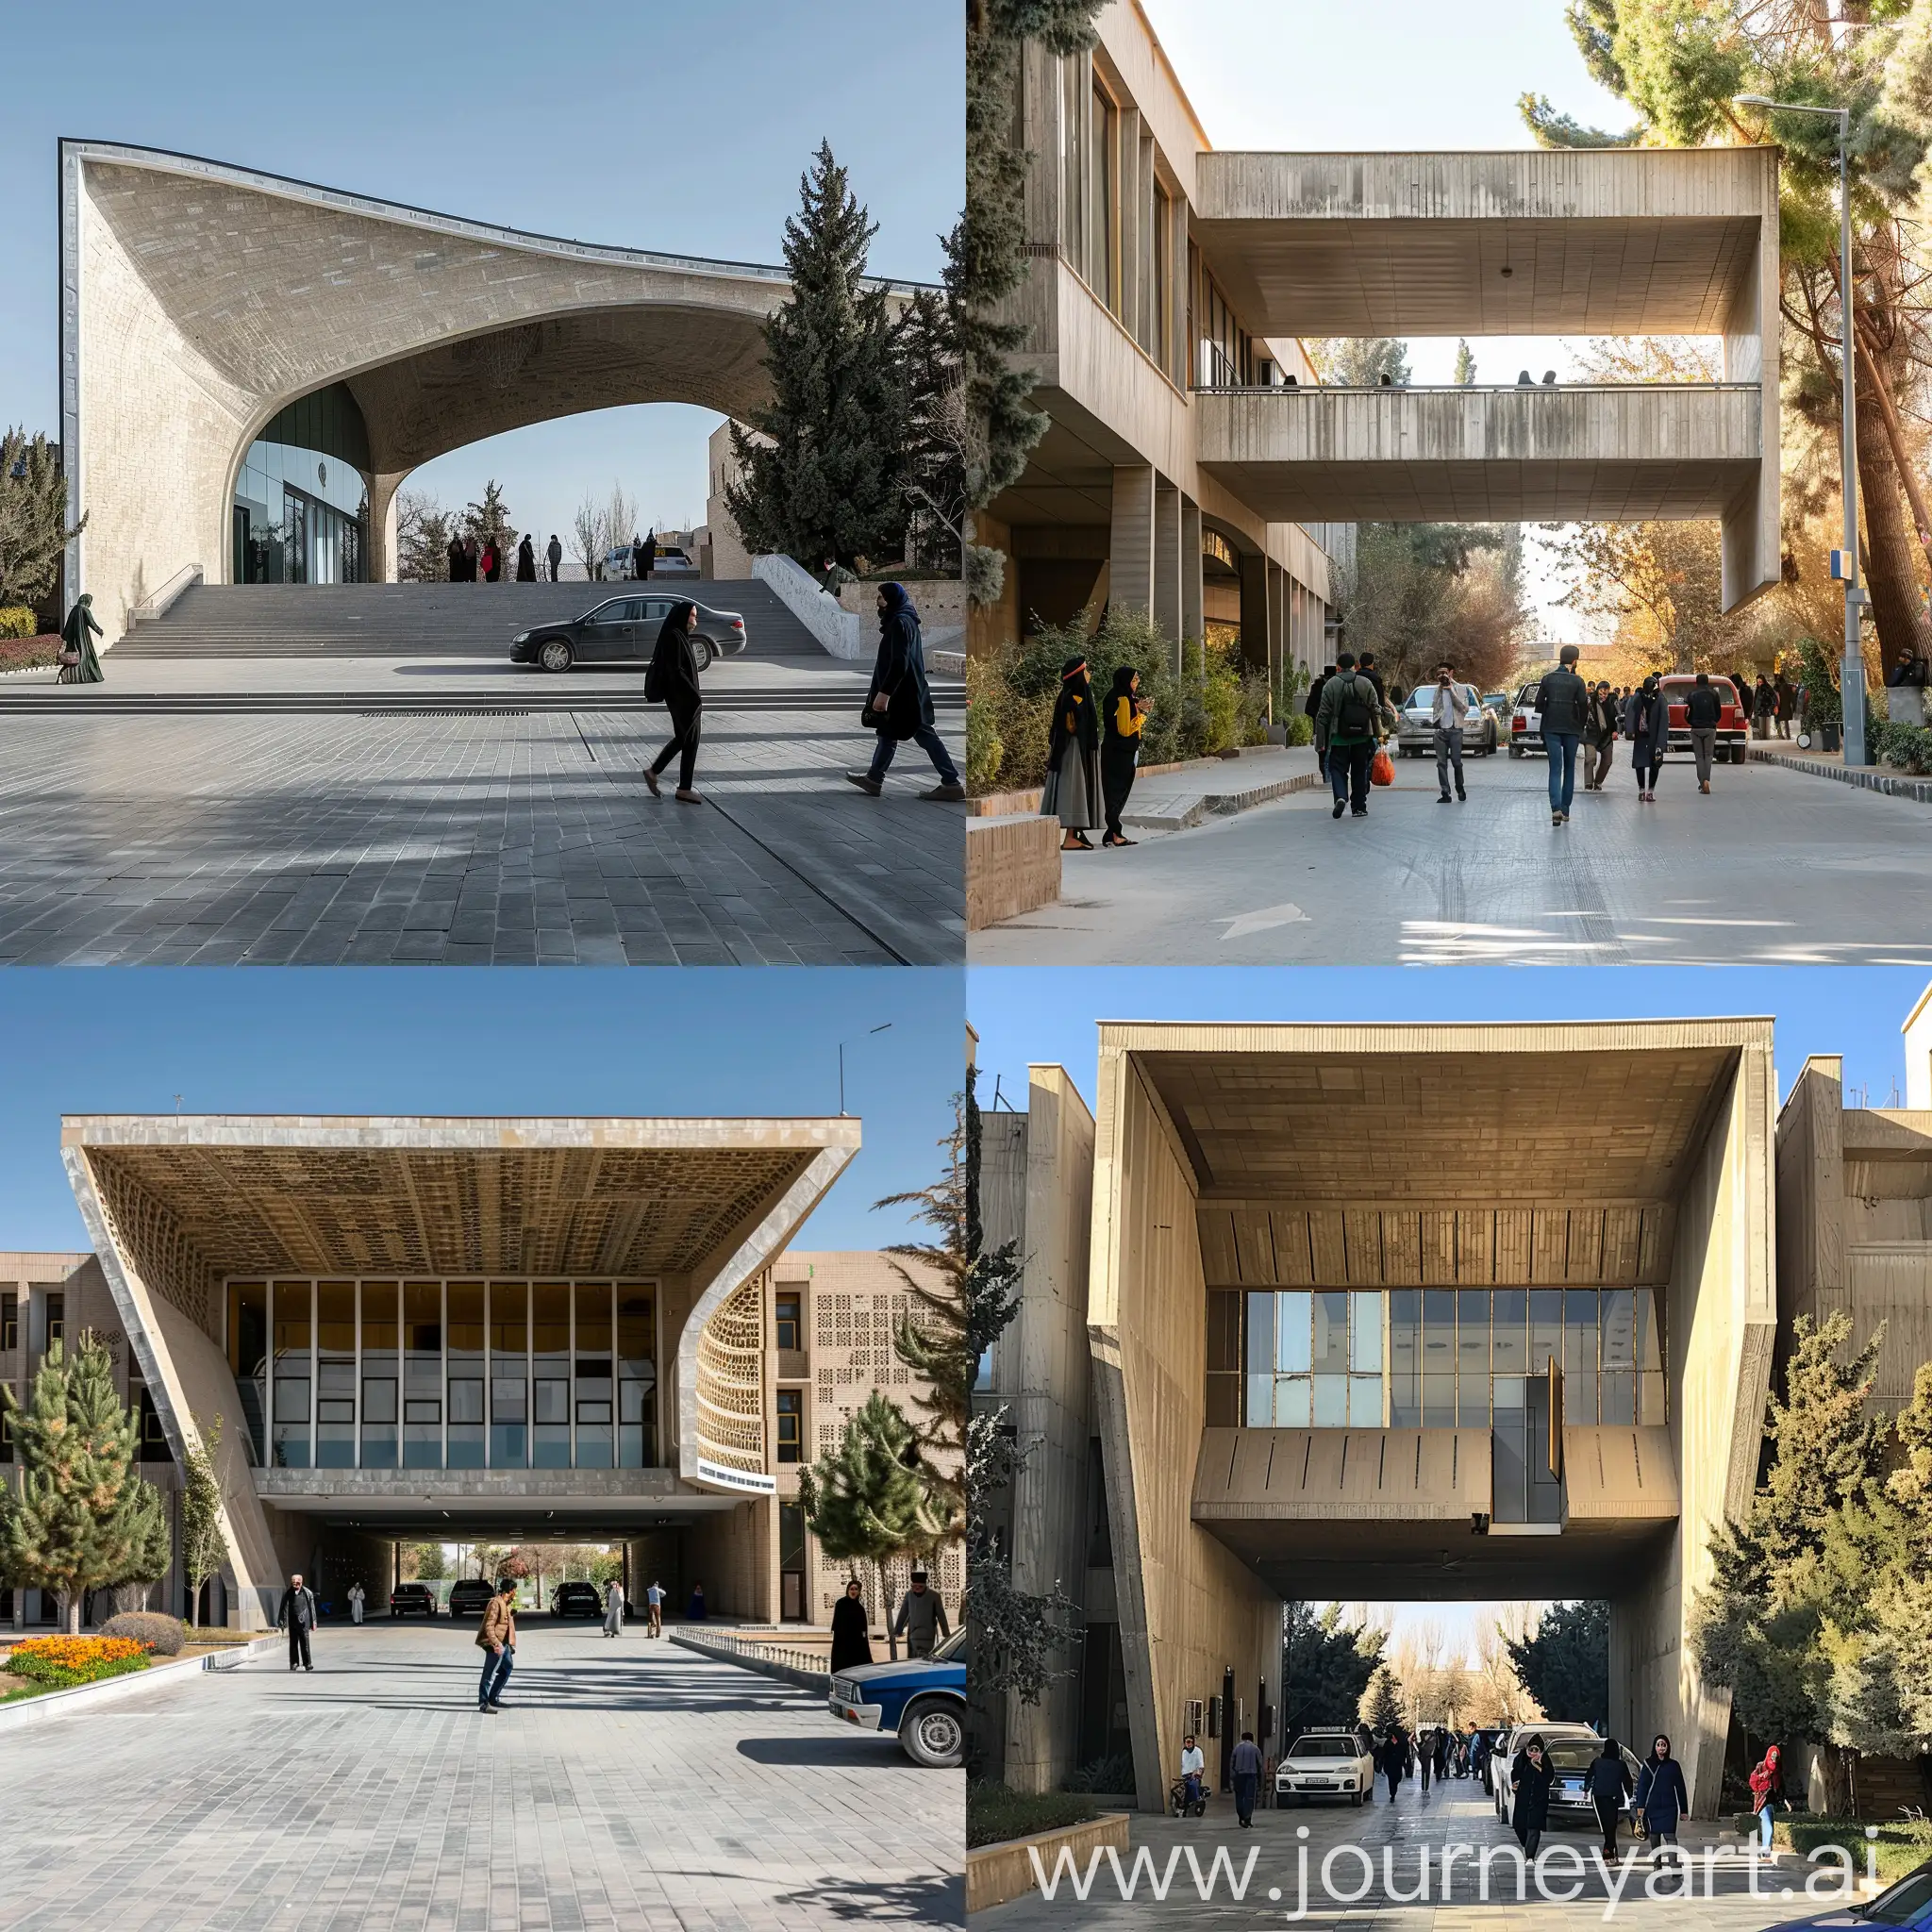 Modern-University-Entrance-in-Iran-with-Car-and-People